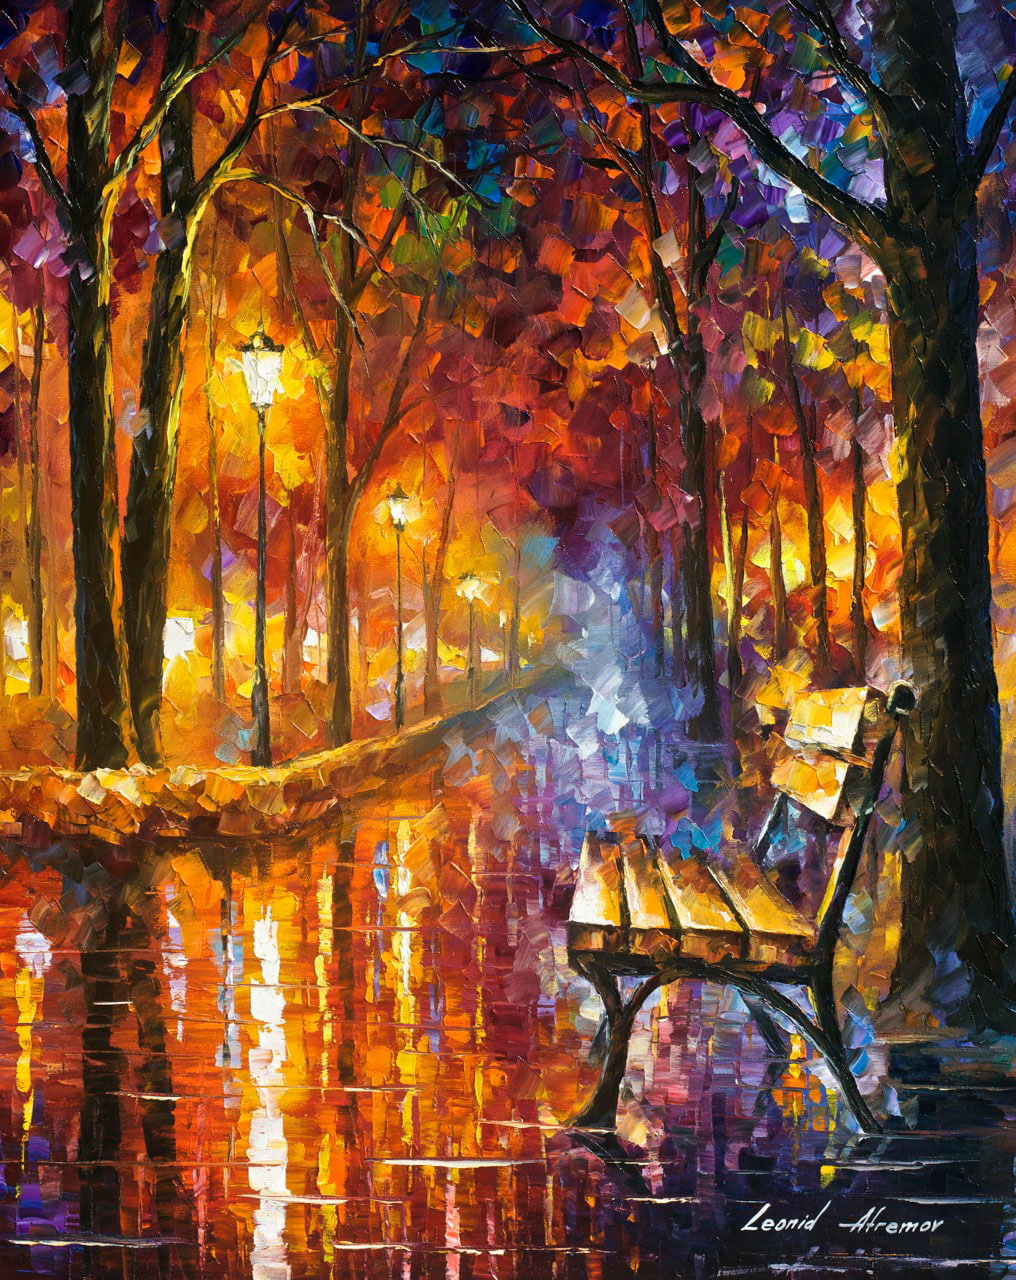 Leonid Afremov  LONELINESS OF PASSION Puzzle Painting